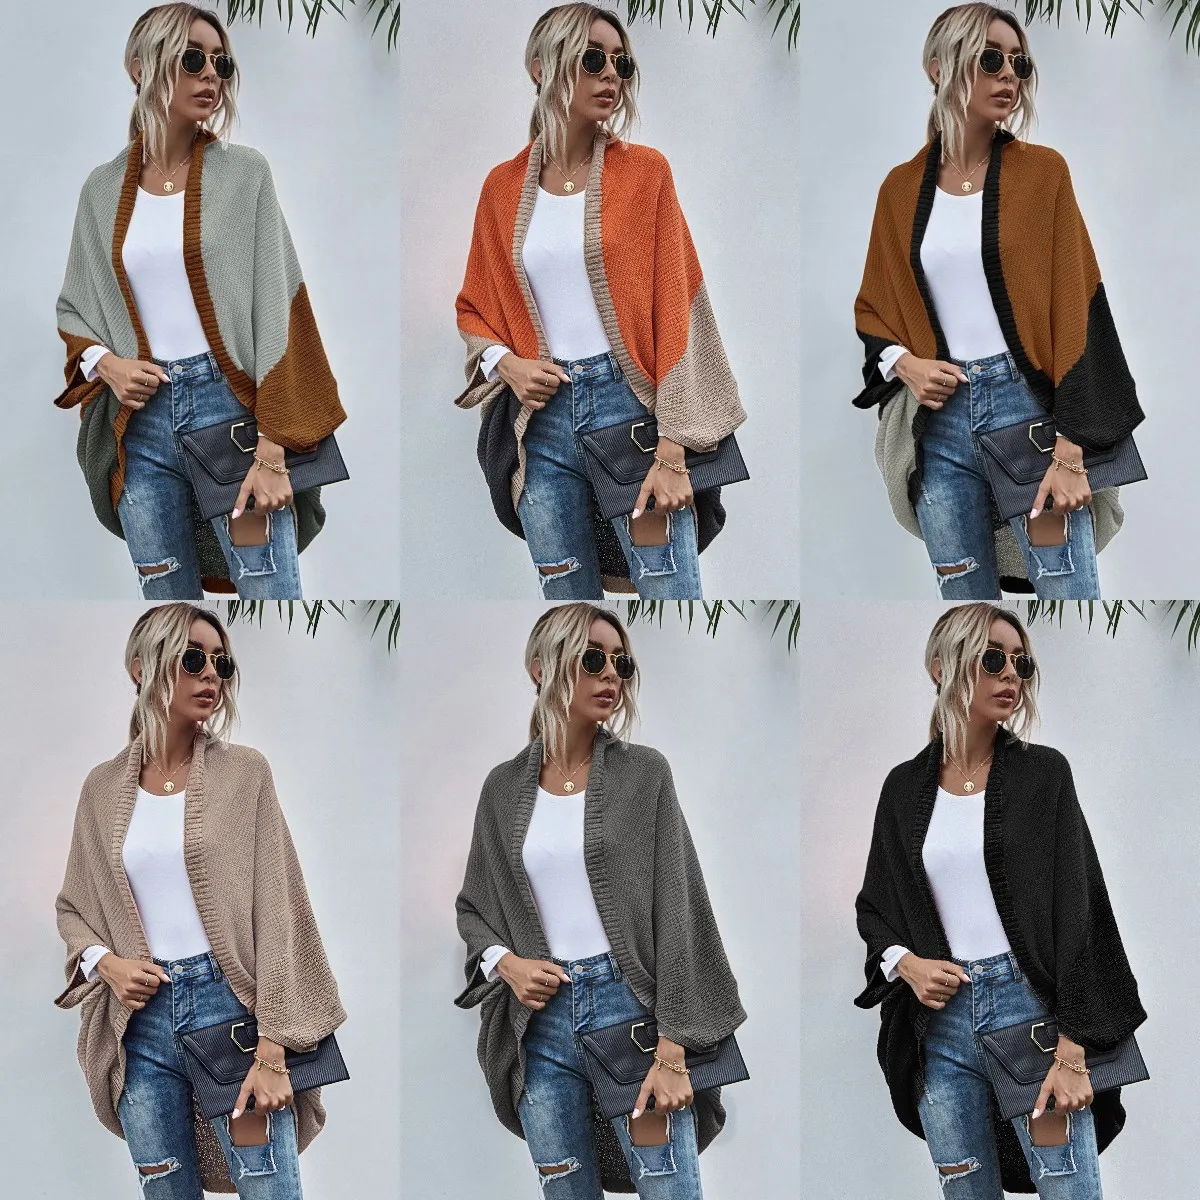 

Women’s Open Front Cropped Cardigan Long Sleeve Colorblock Knitted Soft Sweater Loose Lightweight Slouchy Coat Outwear